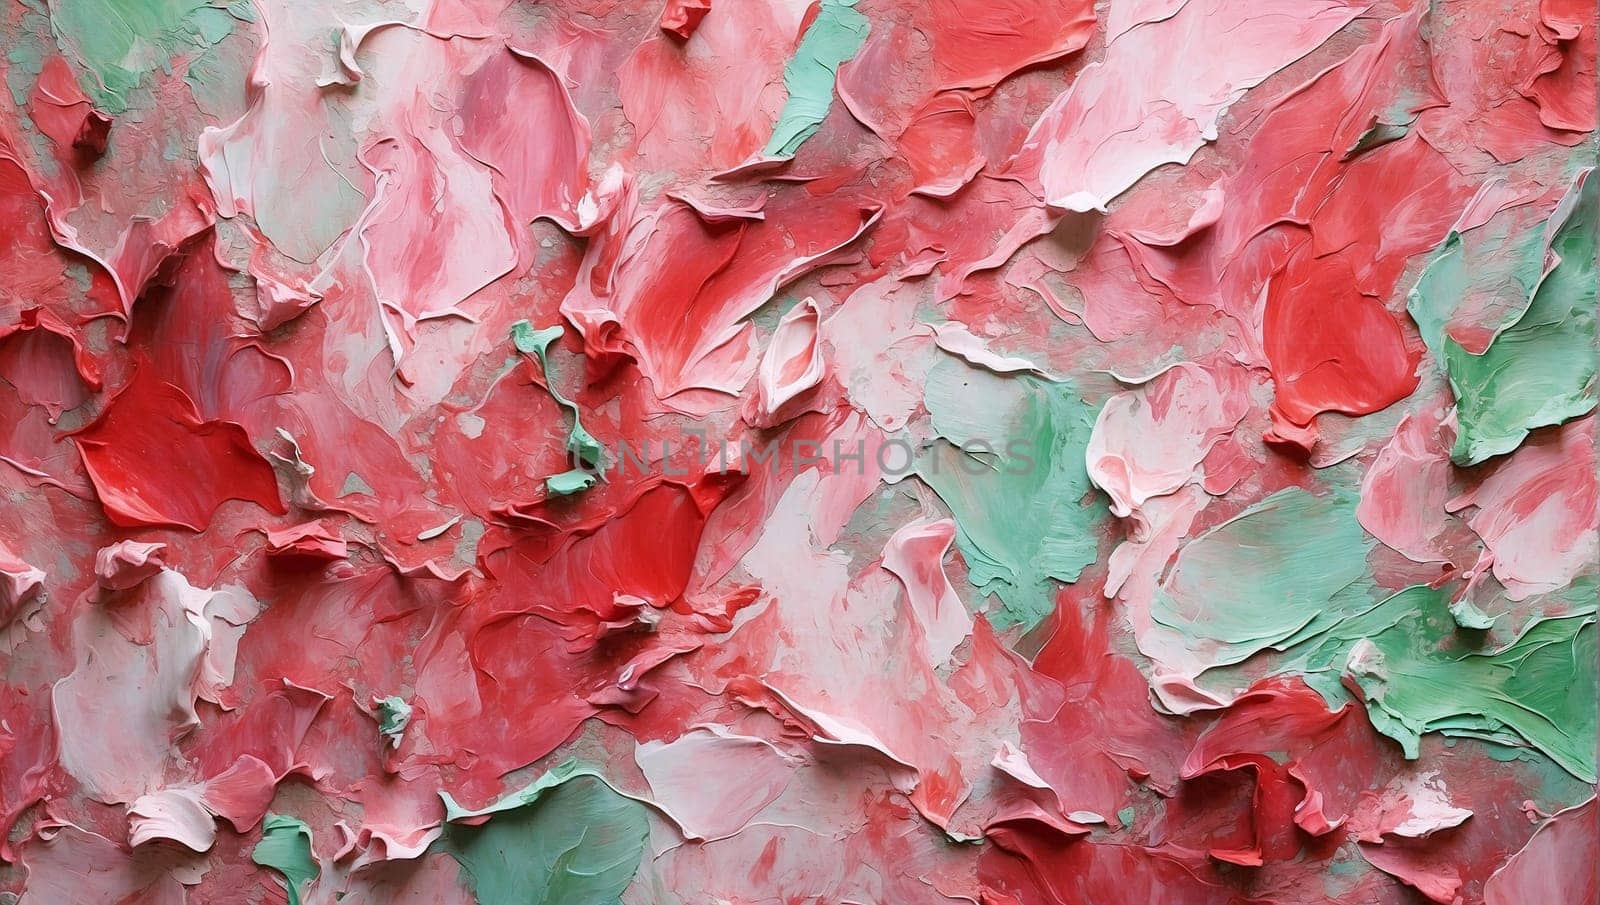 pink texture, red-green abstract watercolor painting background